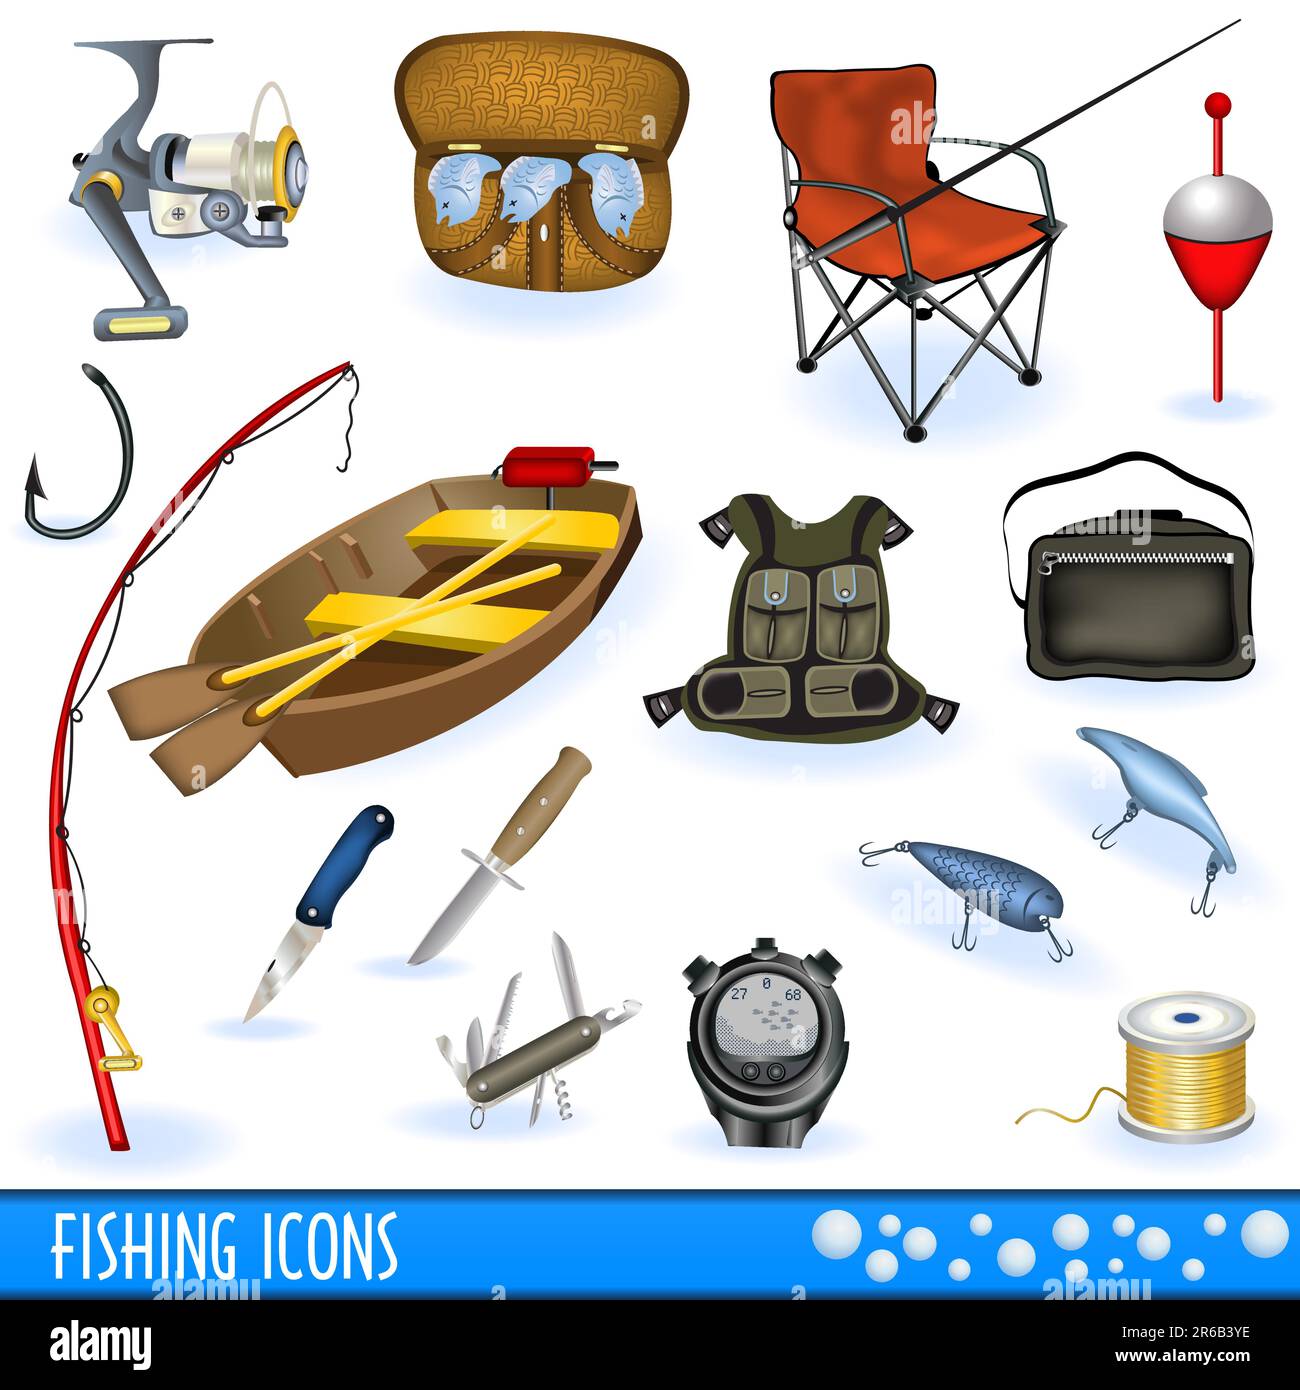 Basket boat fishing Stock Vector Images - Alamy